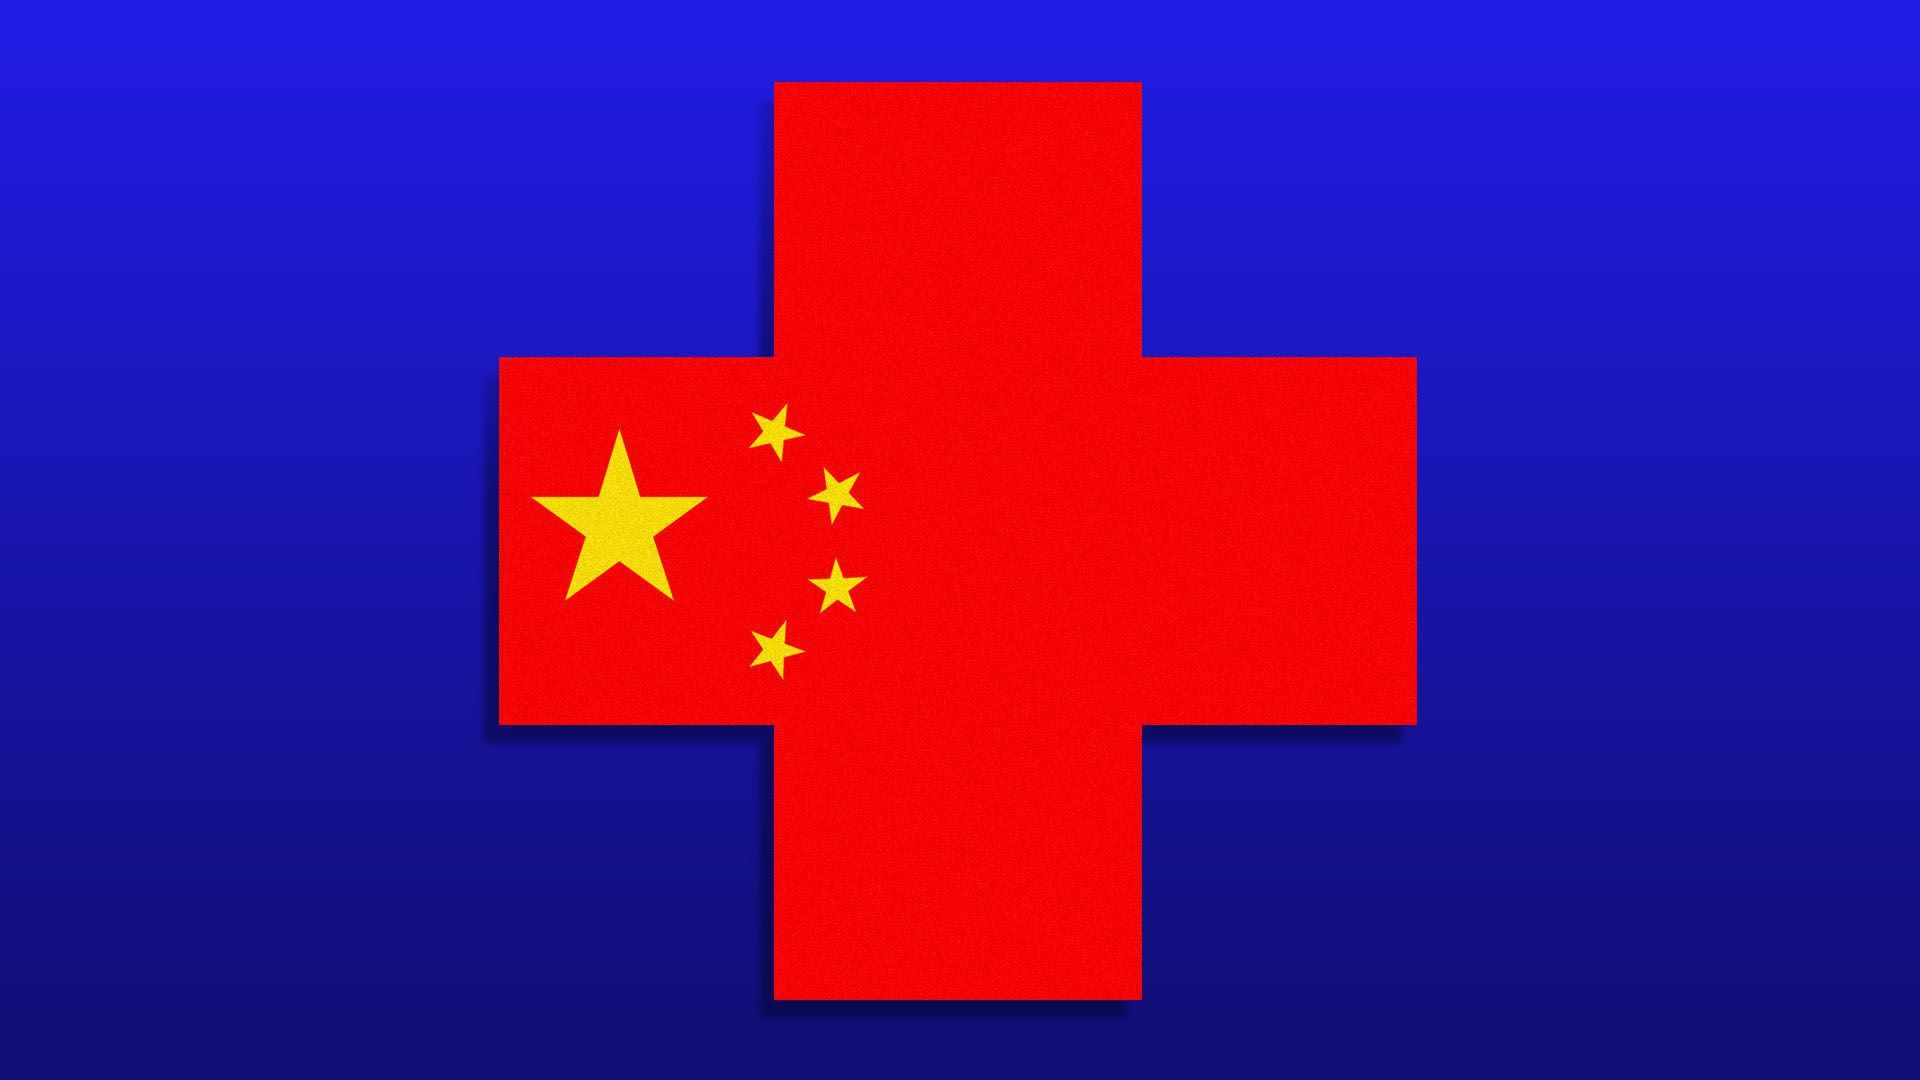 The China flag in a plus sign.